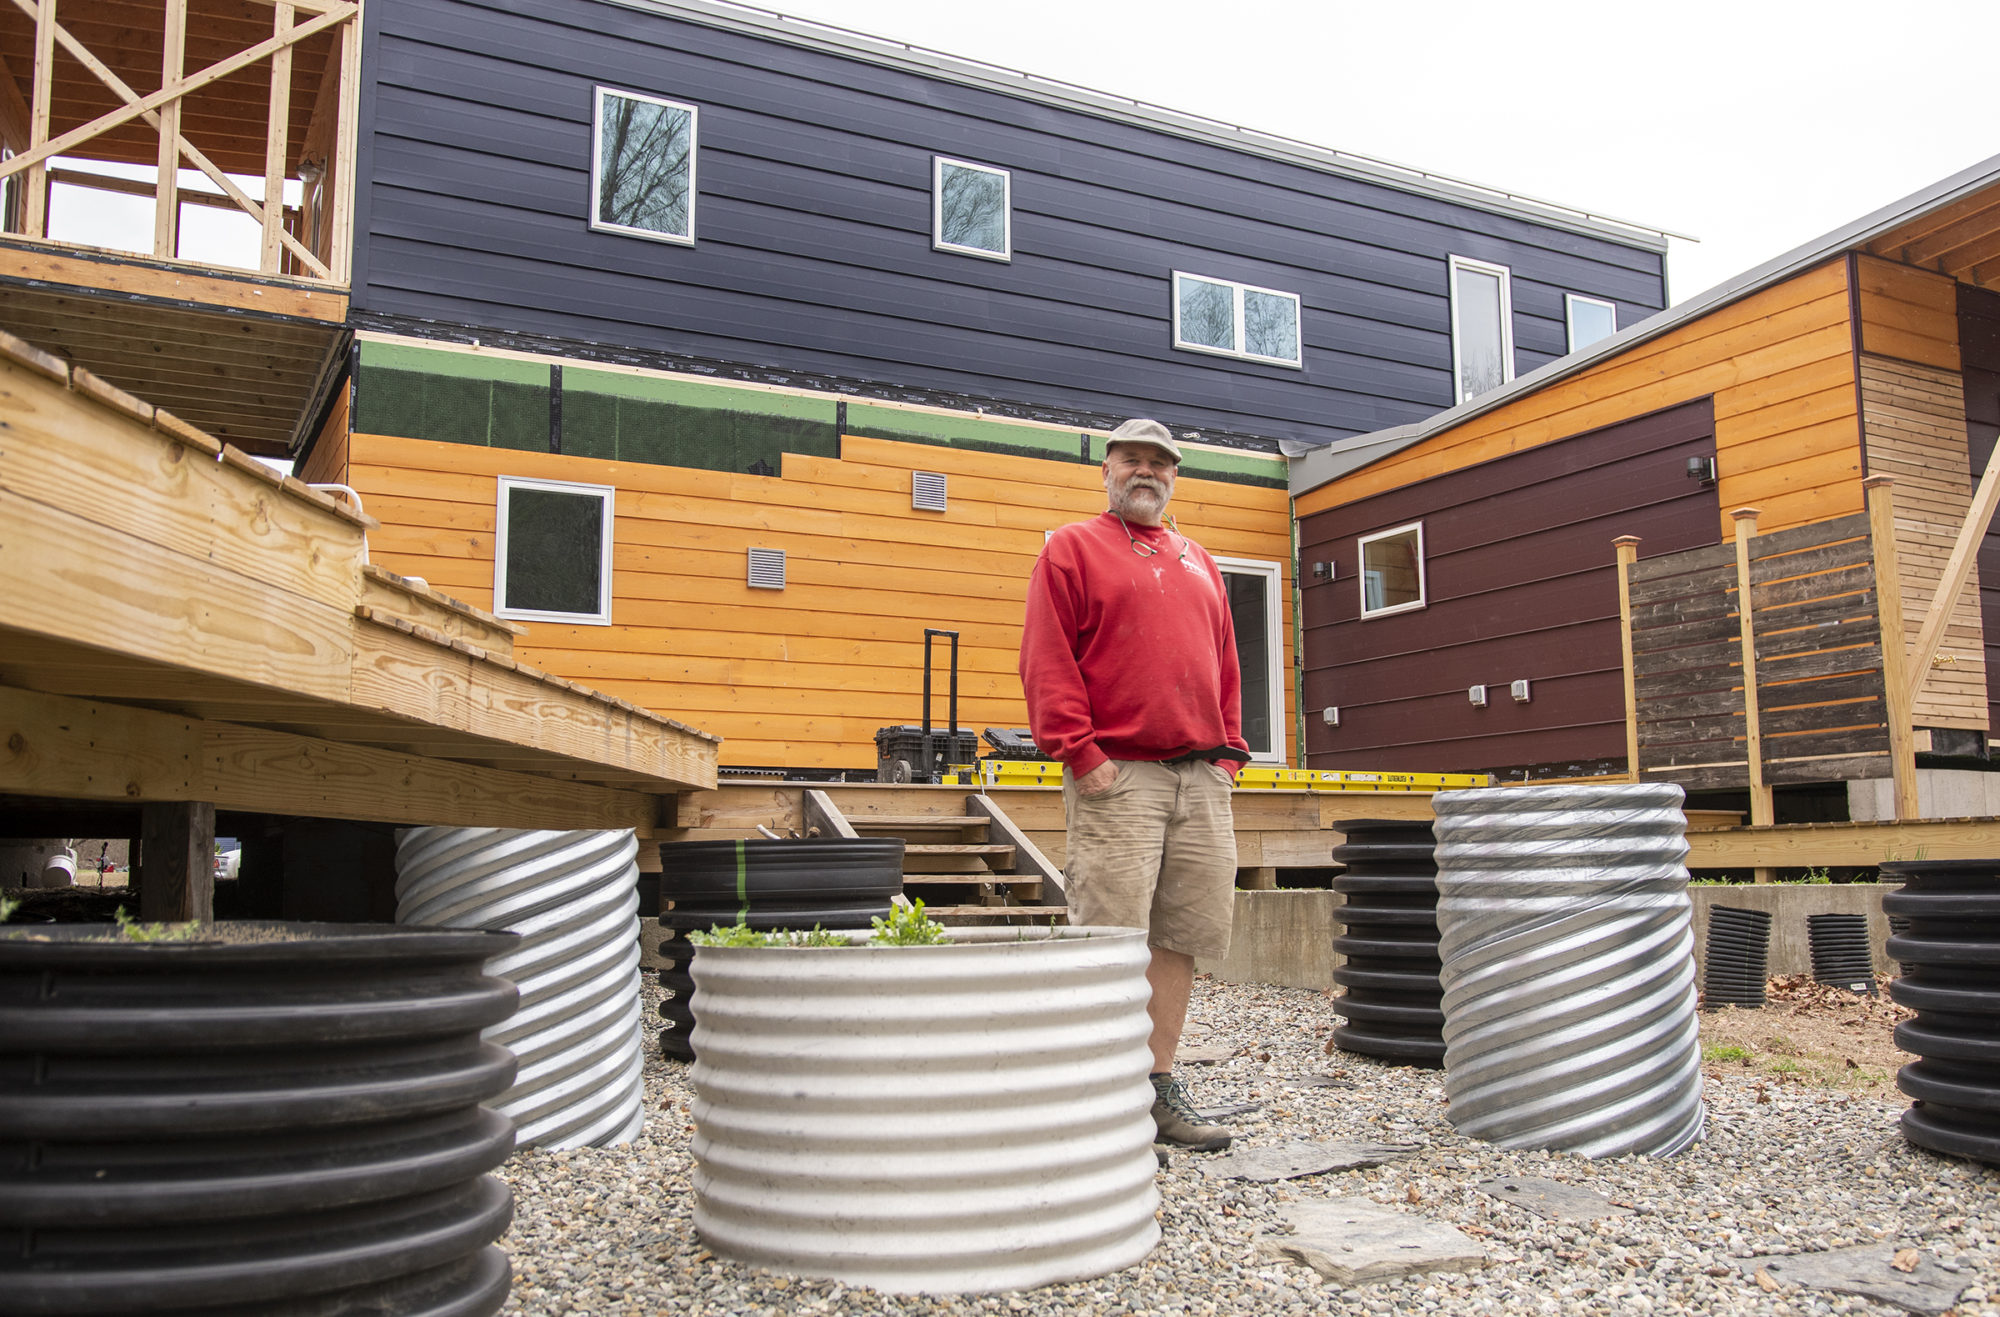 A Vermonter’s Approach to Sustainable, Affordable Housing